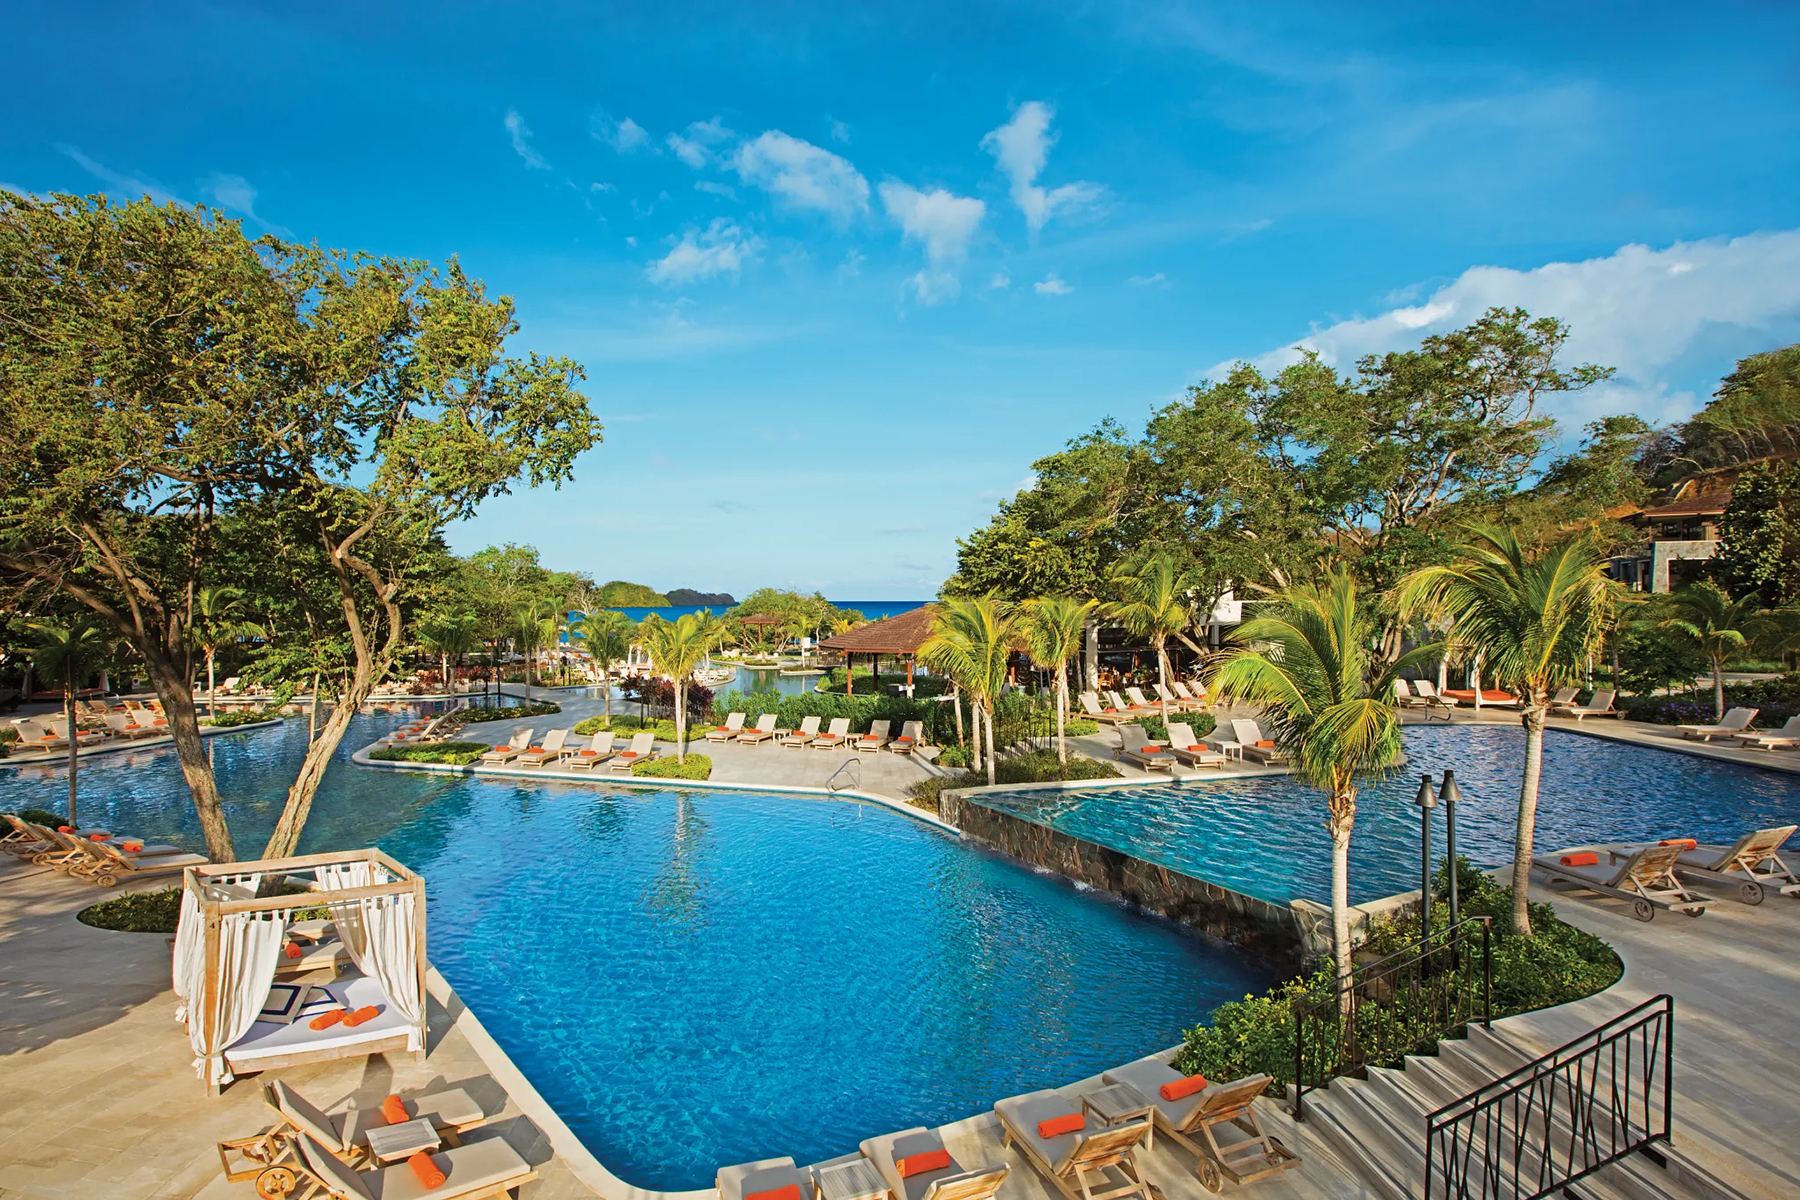 Ultra-Luxury All-Inclusive Resort Las Mareas Costa Rica Timeshare and Vacation Club Promotion